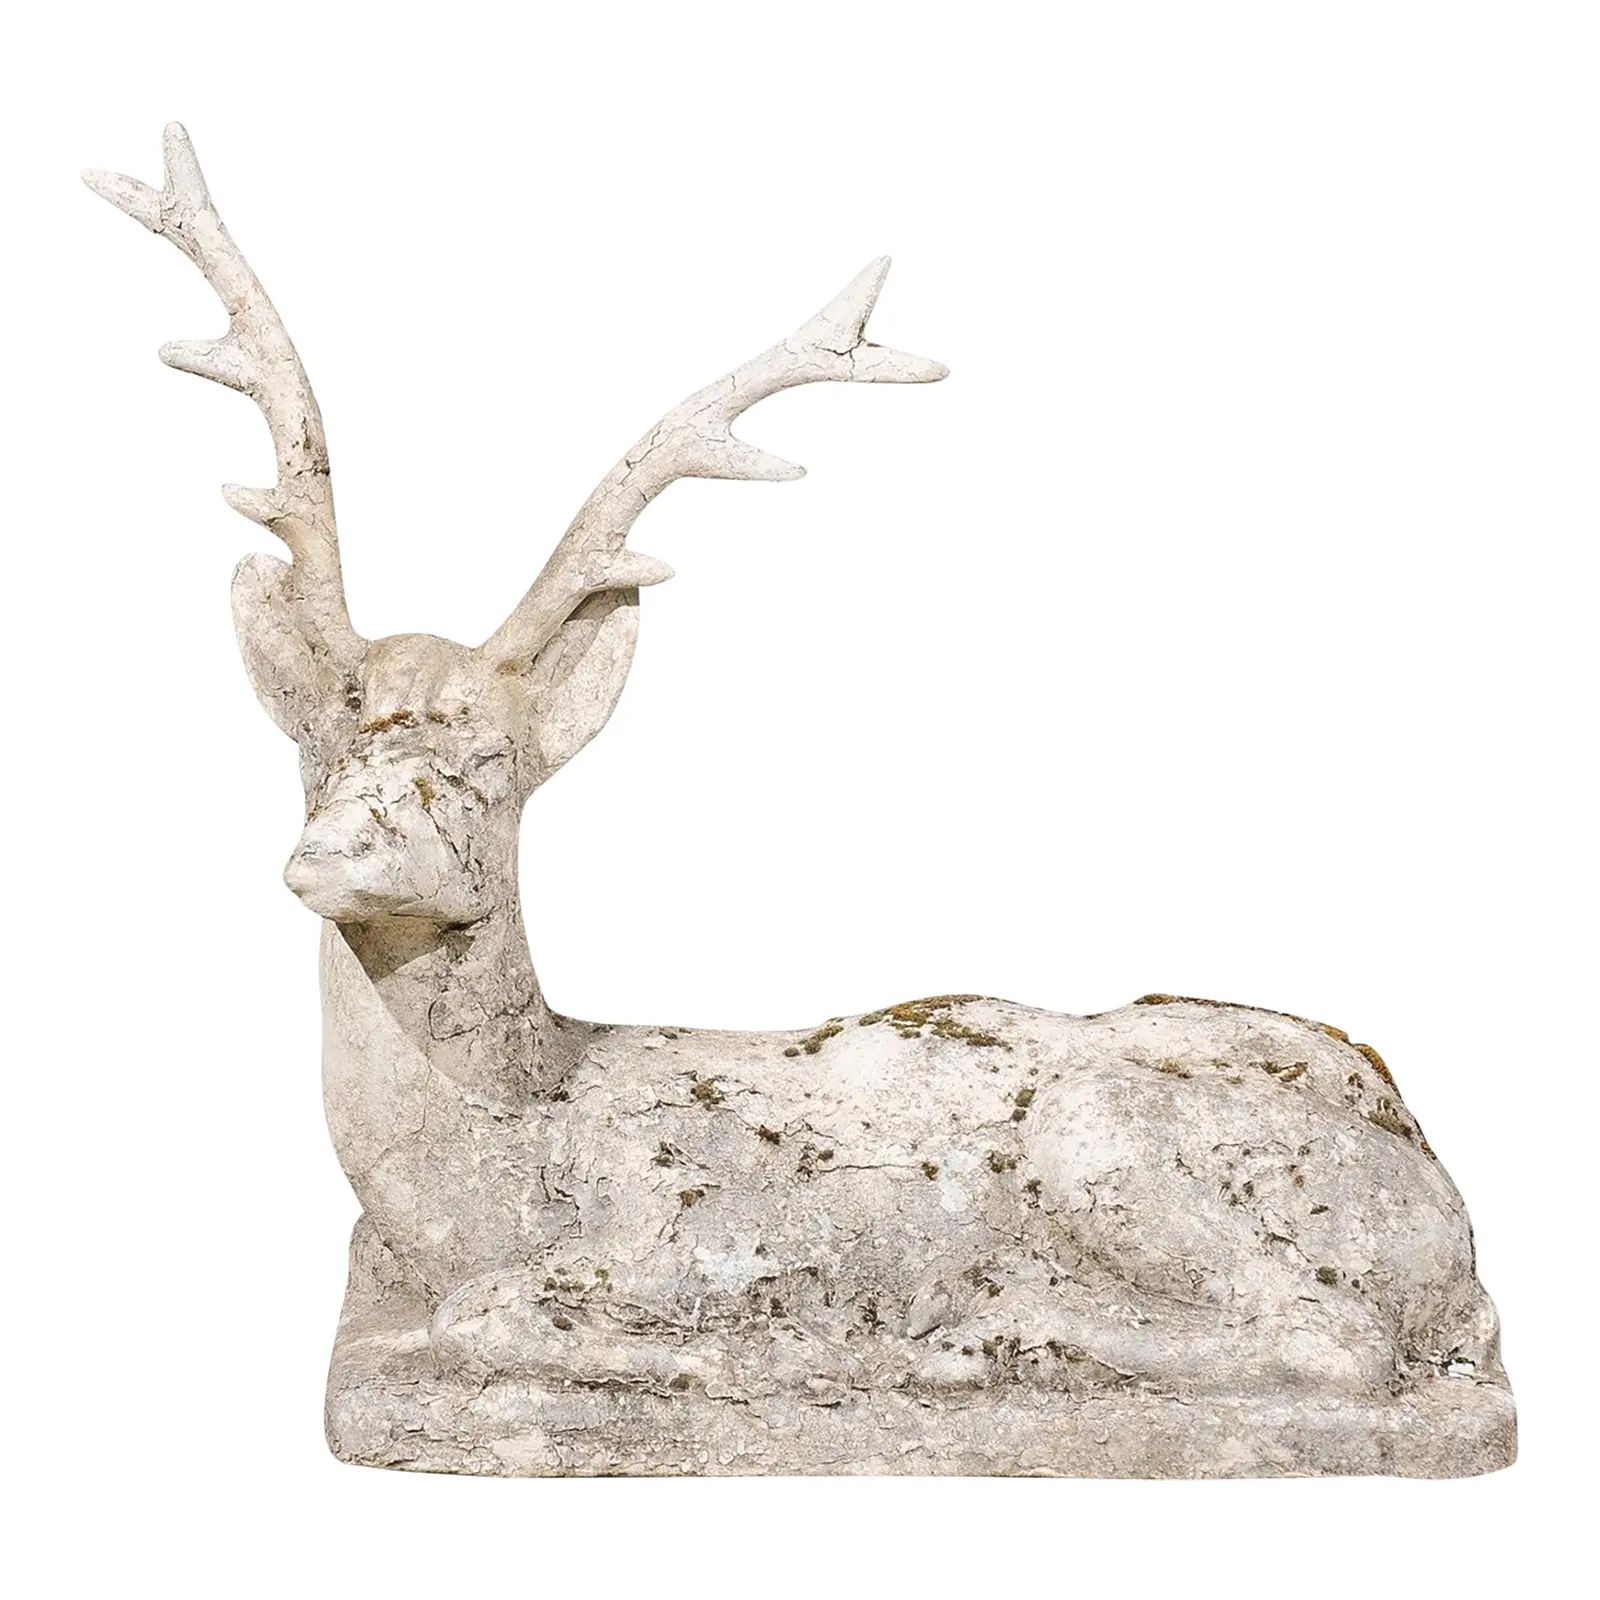 1920s English Reconstituted Stone Reclining Stag Sculpture with Aged Patina | Chairish